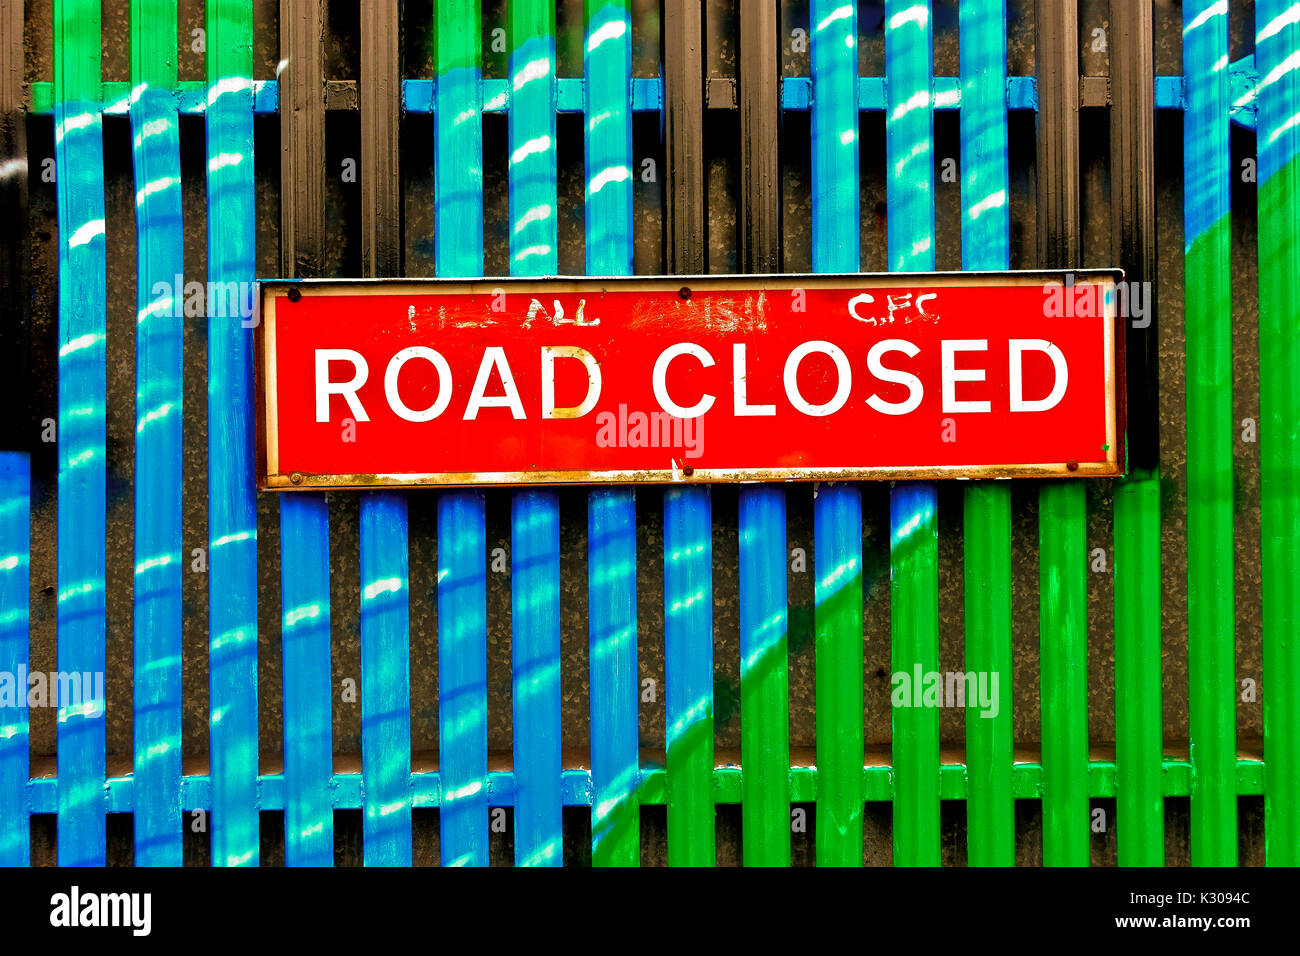 Road closed sign. Security iron gate separating Catholic and Protestant communities, at Belfast peace wall. Northern Ireland, United Kingdom, UK Stock Photo